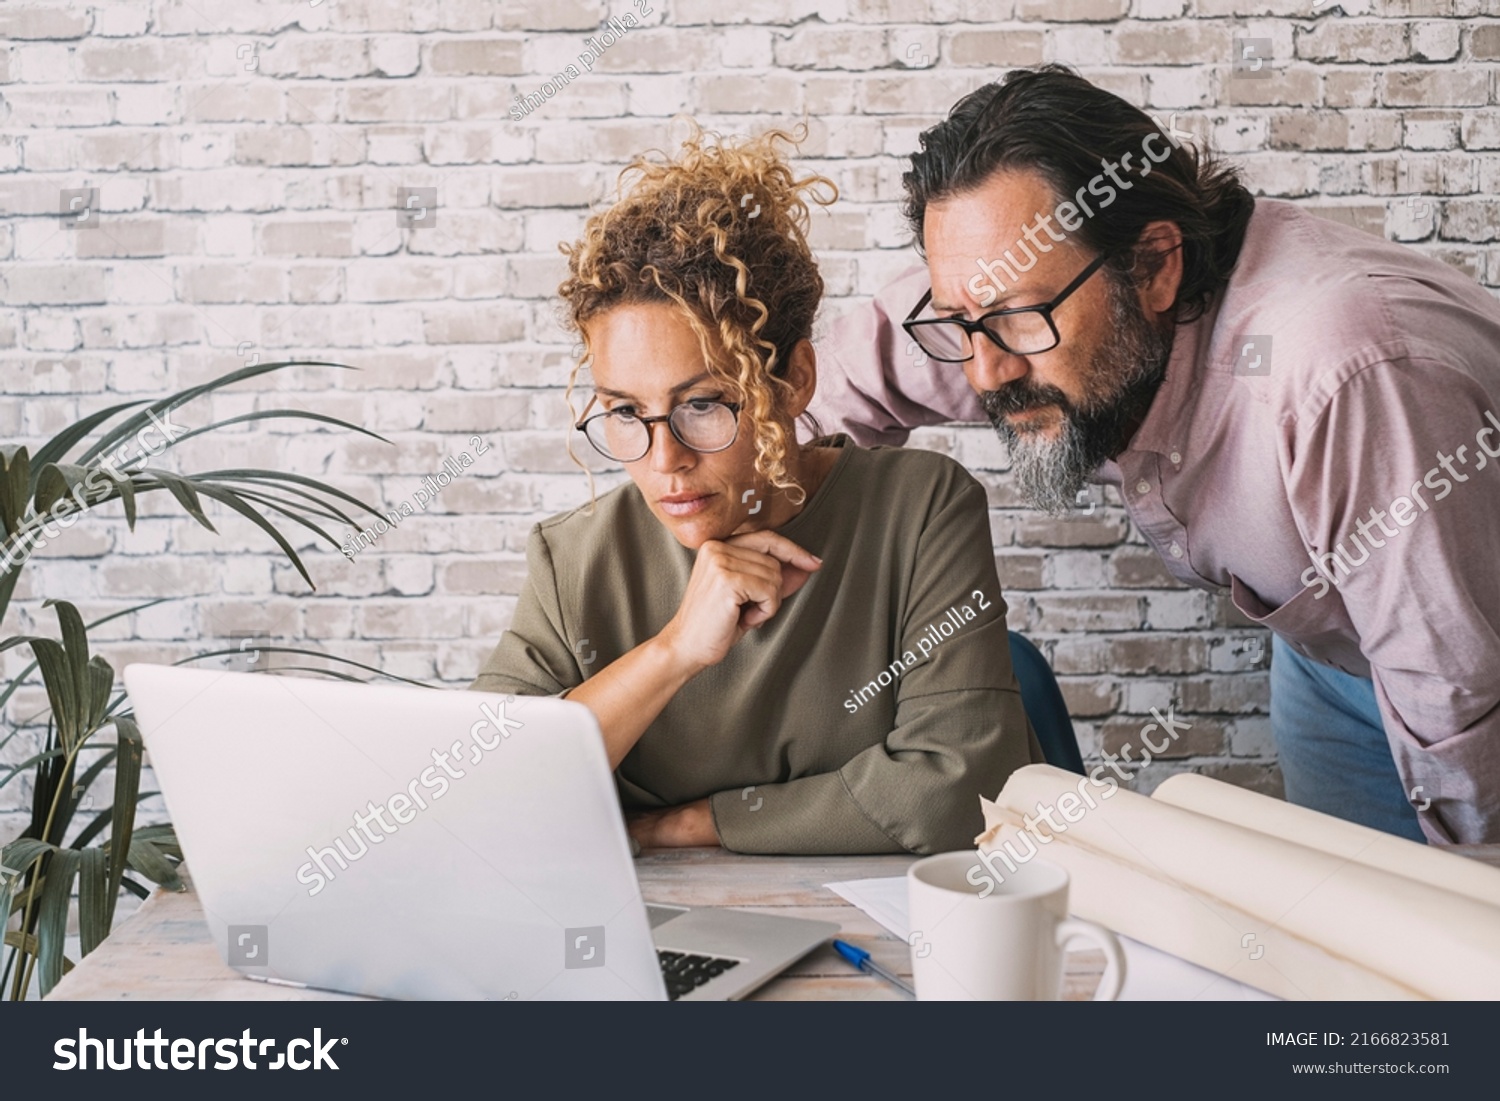 Man and woman working together on laptop in home office at the table desk. People and online digital job business. Adult couple looking with concentration on computer working. Concept of modern life #2166823581